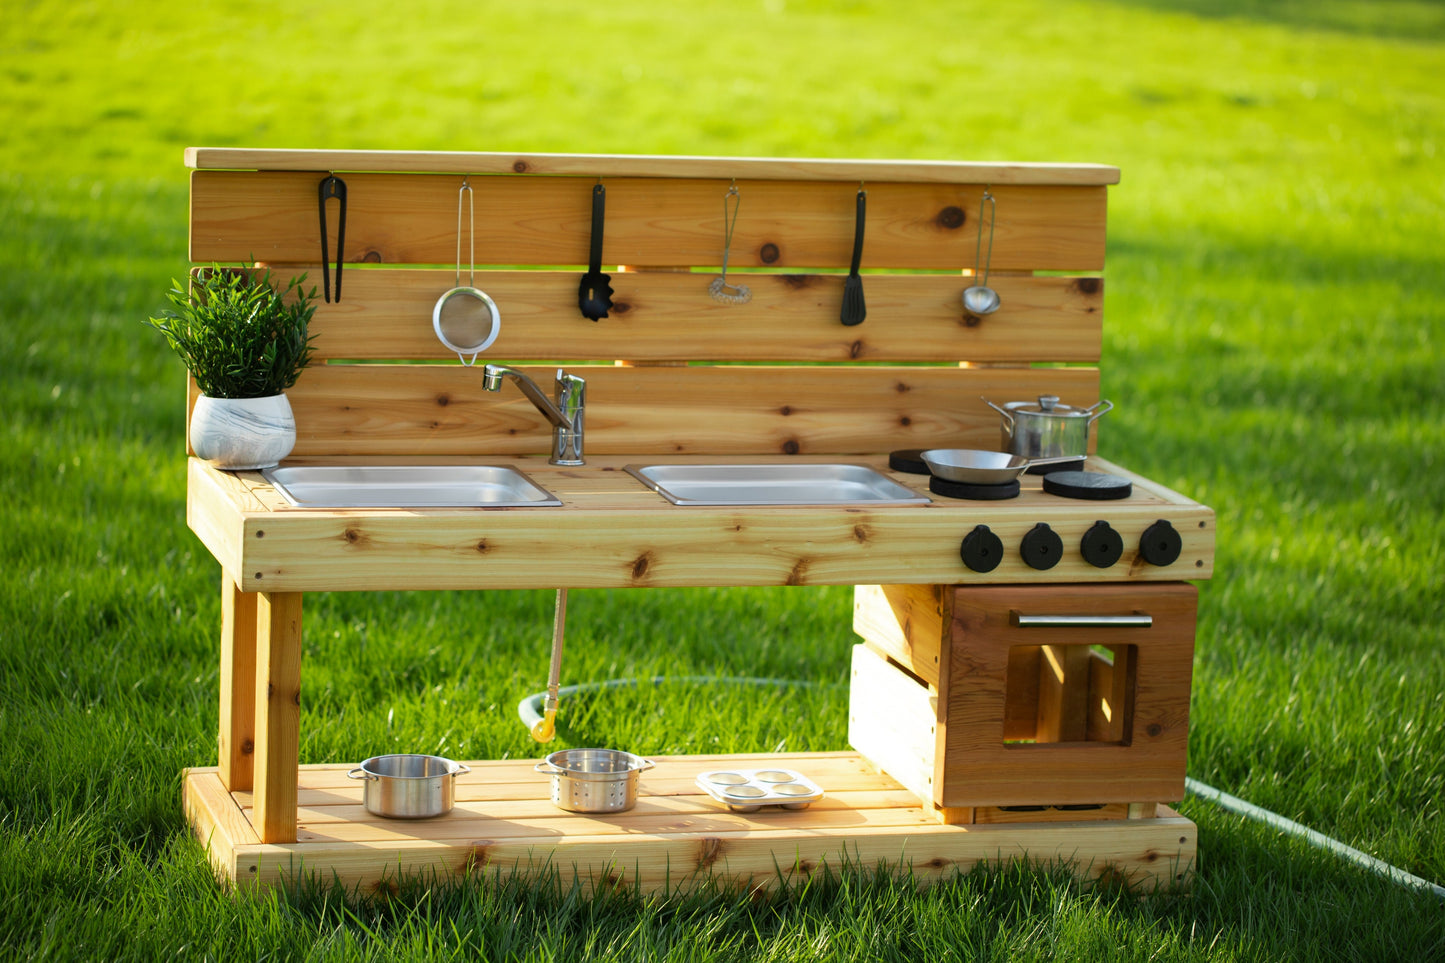 Mud Kitchen with Oven and Working Sink